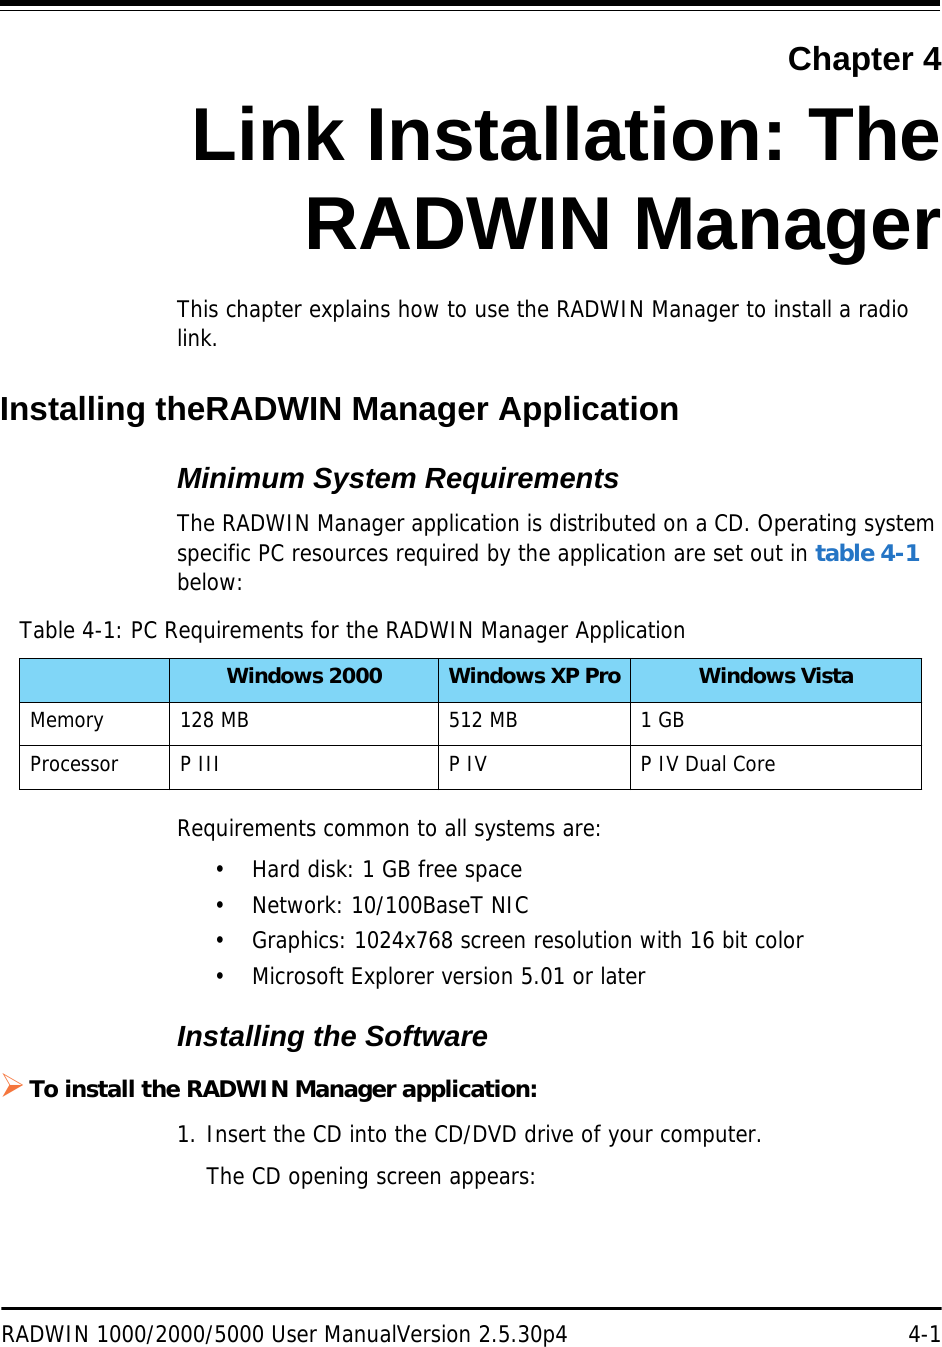 RADWIN 1000/2000/5000 User ManualVersion 2.5.30p4 4-1Chapter 4Link Installation: TheRADWIN ManagerThis chapter explains how to use the RADWIN Manager to install a radio link.Installing theRADWIN Manager ApplicationMinimum System RequirementsThe RADWIN Manager application is distributed on a CD. Operating system specific PC resources required by the application are set out in table 4-1 below:Requirements common to all systems are:• Hard disk: 1 GB free space• Network: 10/100BaseT NIC• Graphics: 1024x768 screen resolution with 16 bit color• Microsoft Explorer version 5.01 or laterInstalling the SoftwareTo install the RADWIN Manager application:1. Insert the CD into the CD/DVD drive of your computer.The CD opening screen appears:Table 4-1: PC Requirements for the RADWIN Manager ApplicationWindows 2000 Windows XP Pro Windows VistaMemory 128 MB 512 MB 1 GBProcessor P III P IV P IV Dual Core